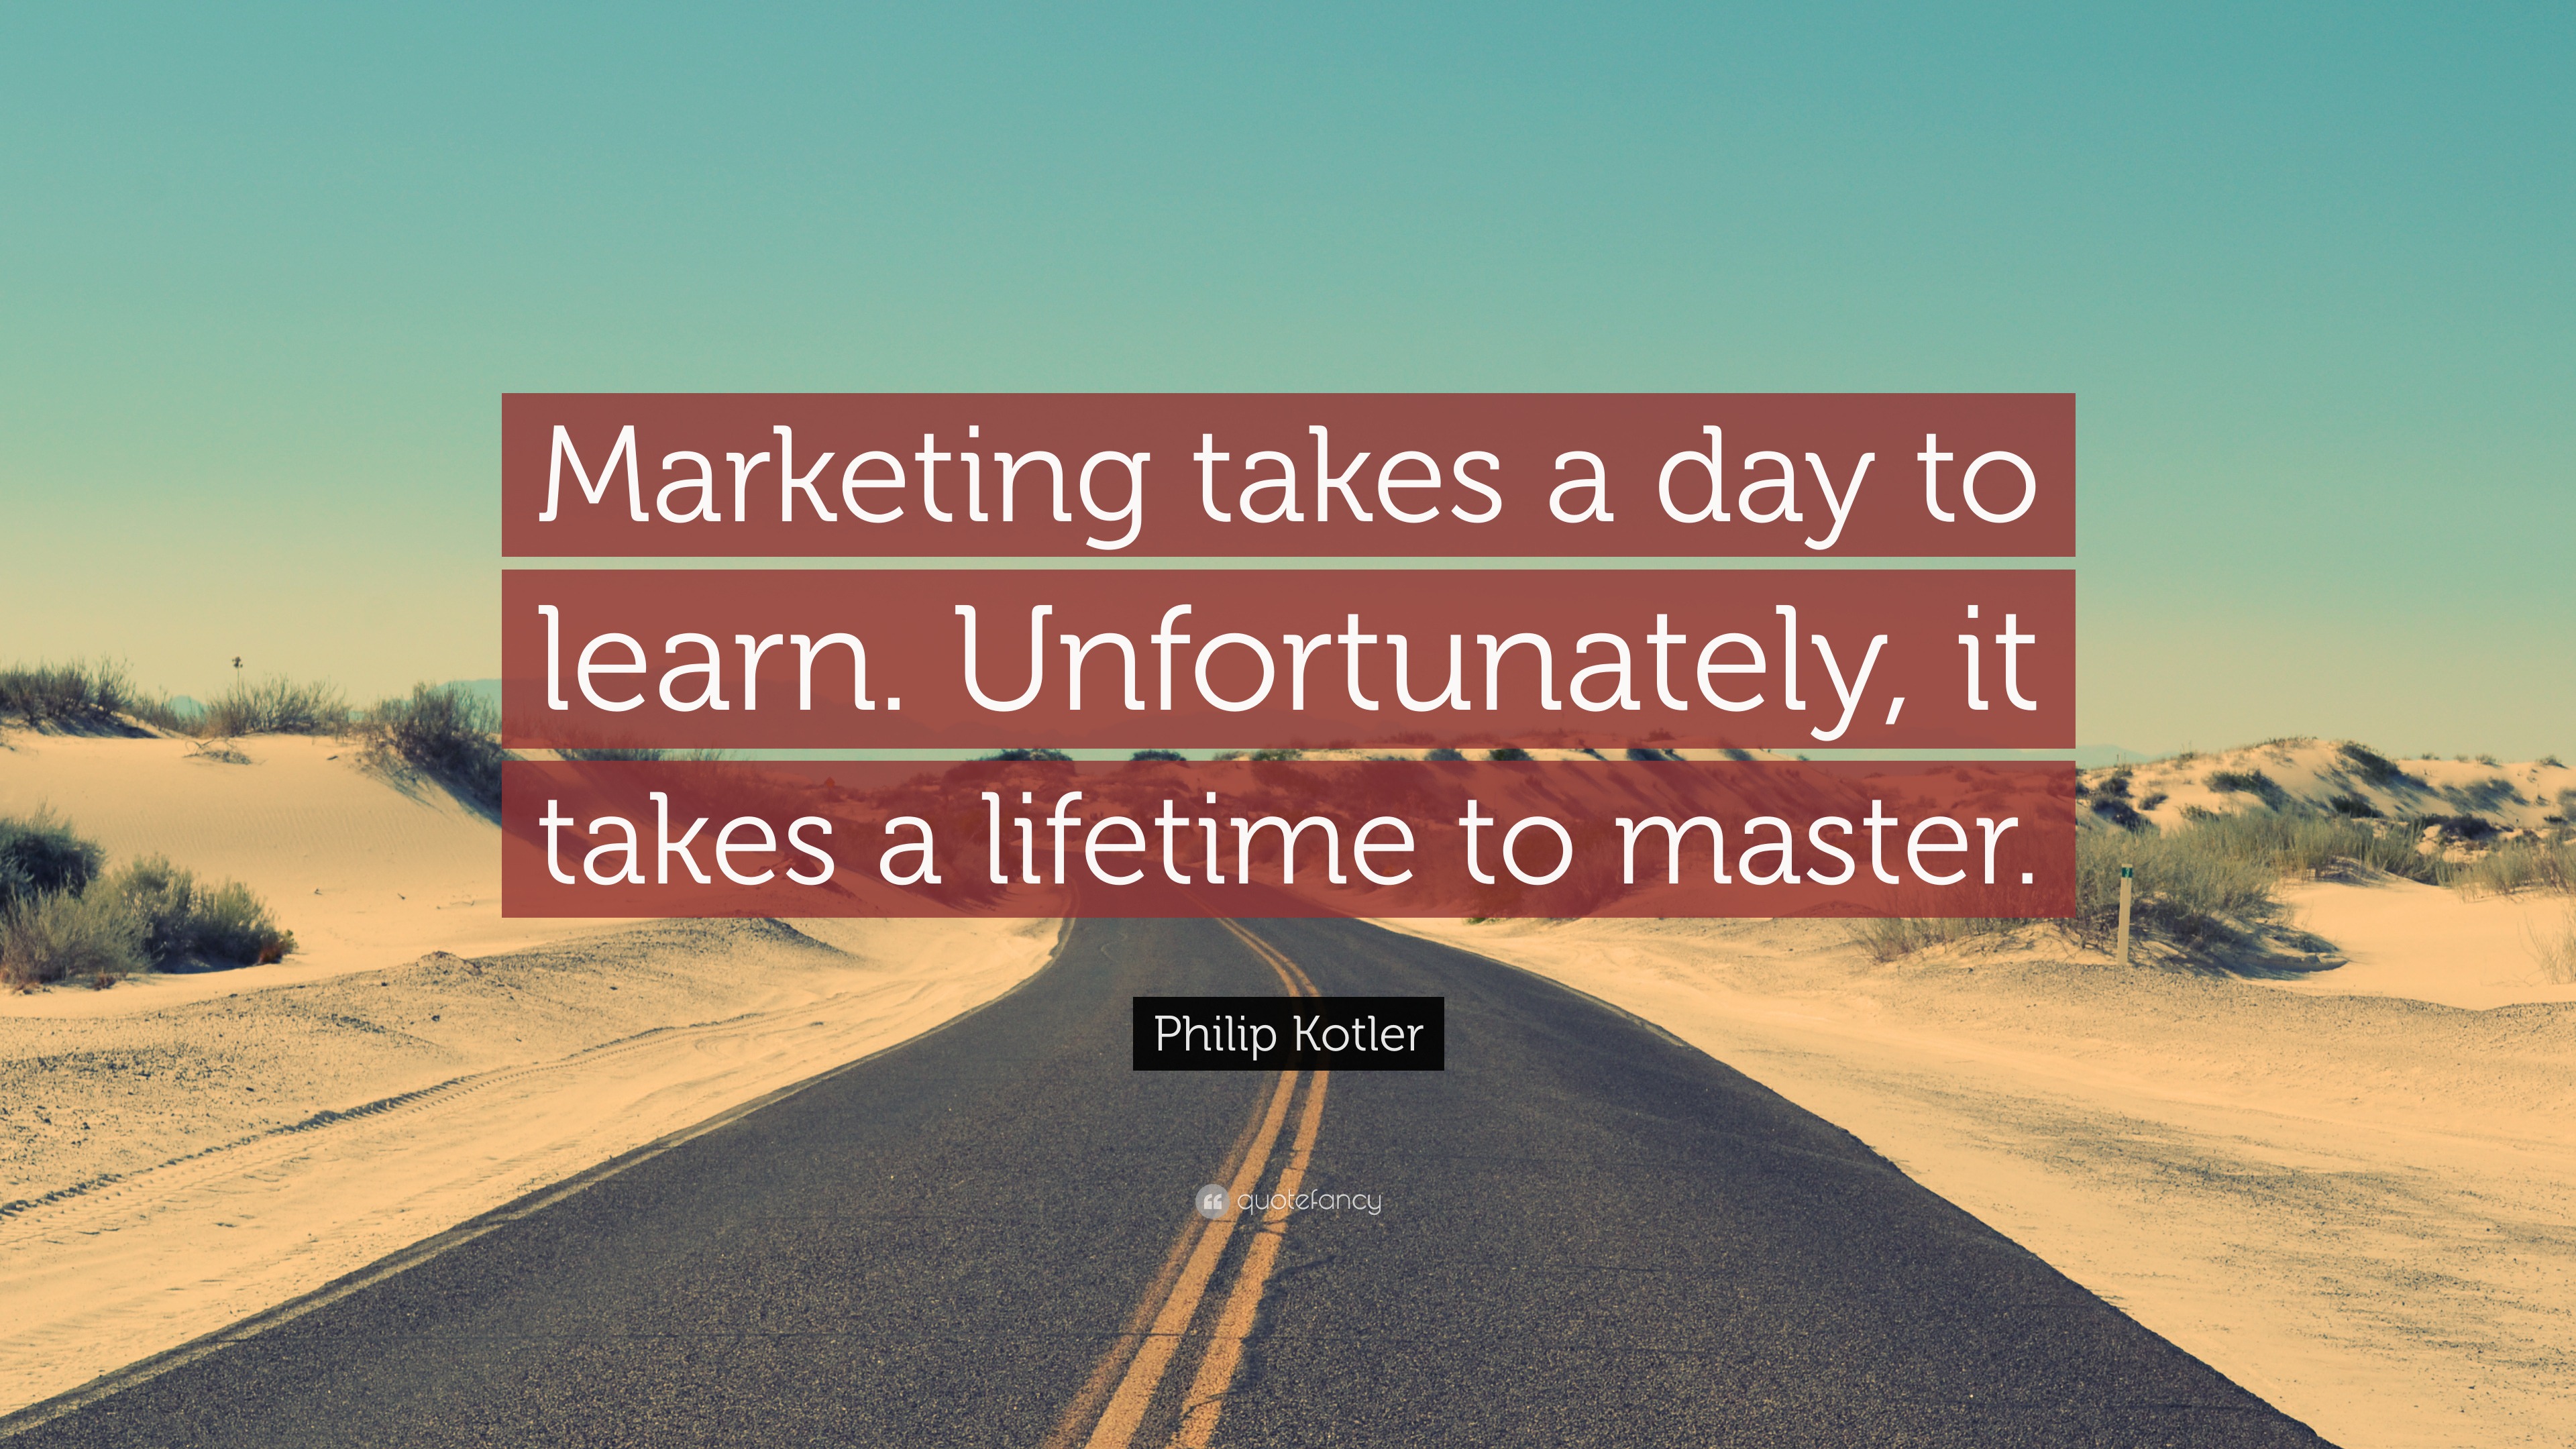 Philip Kotler Quote “Marketing takes a day to learn